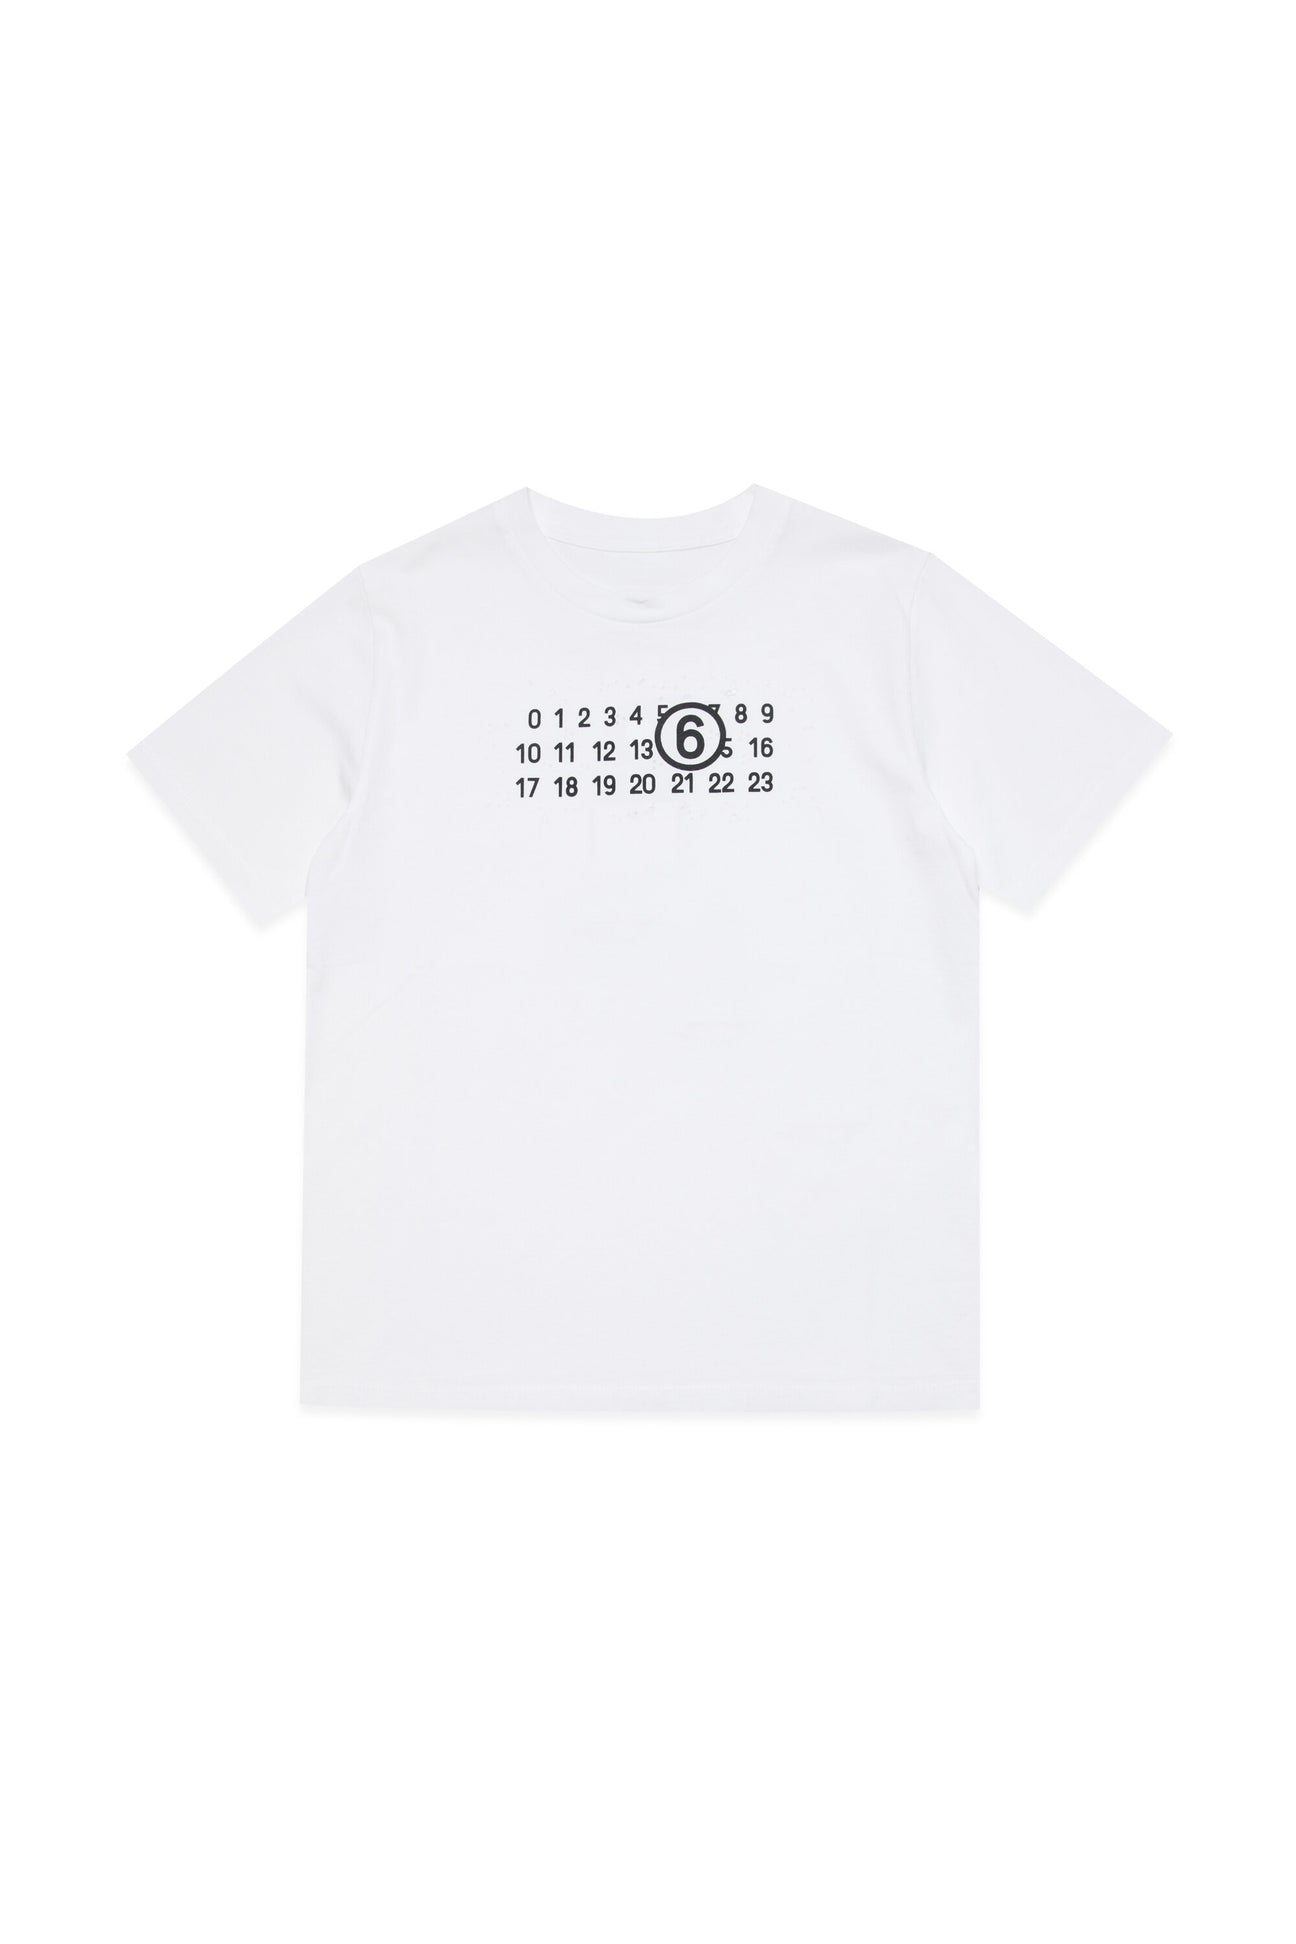 Torn T-shirt branded with numeric logo 